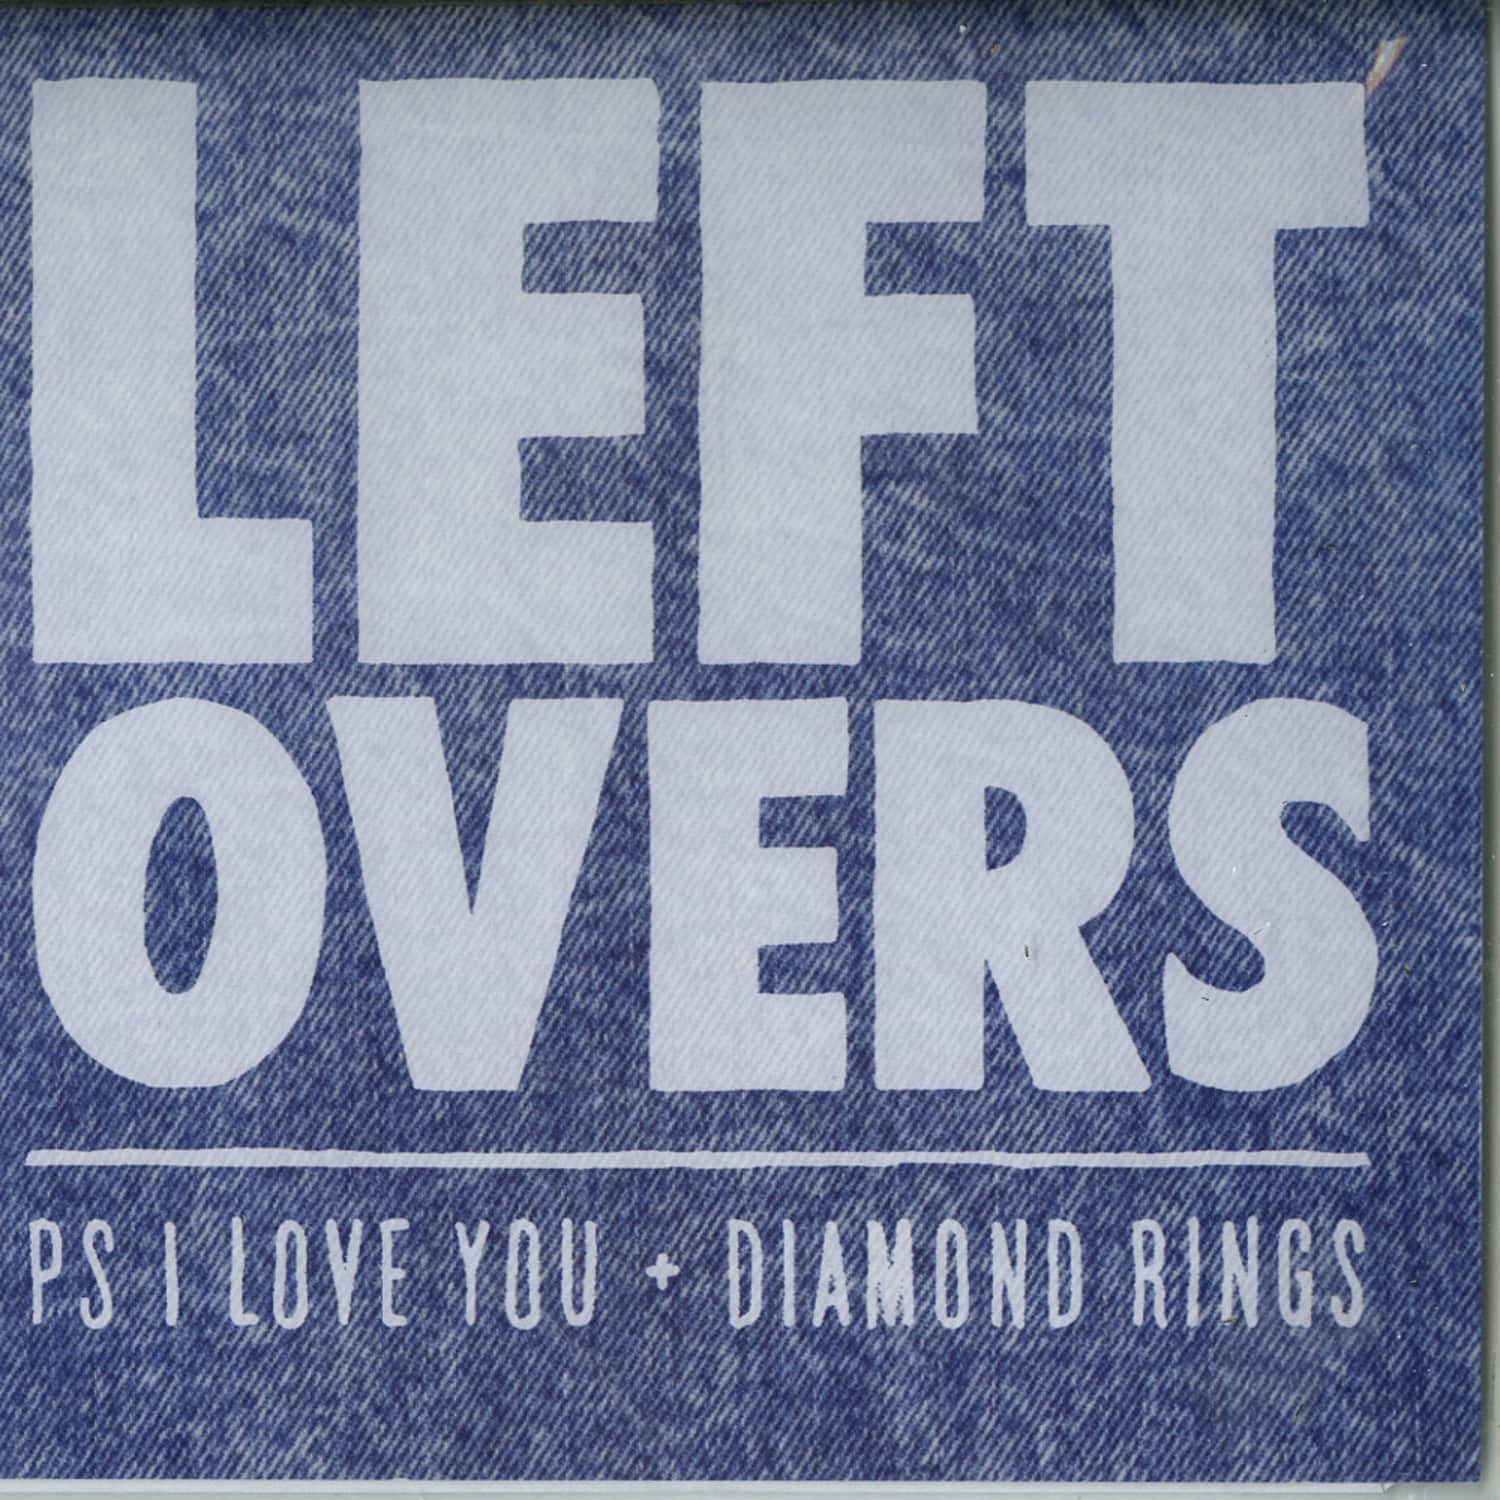 PS I Love You / Diamond Rings - LEFT OVERS 